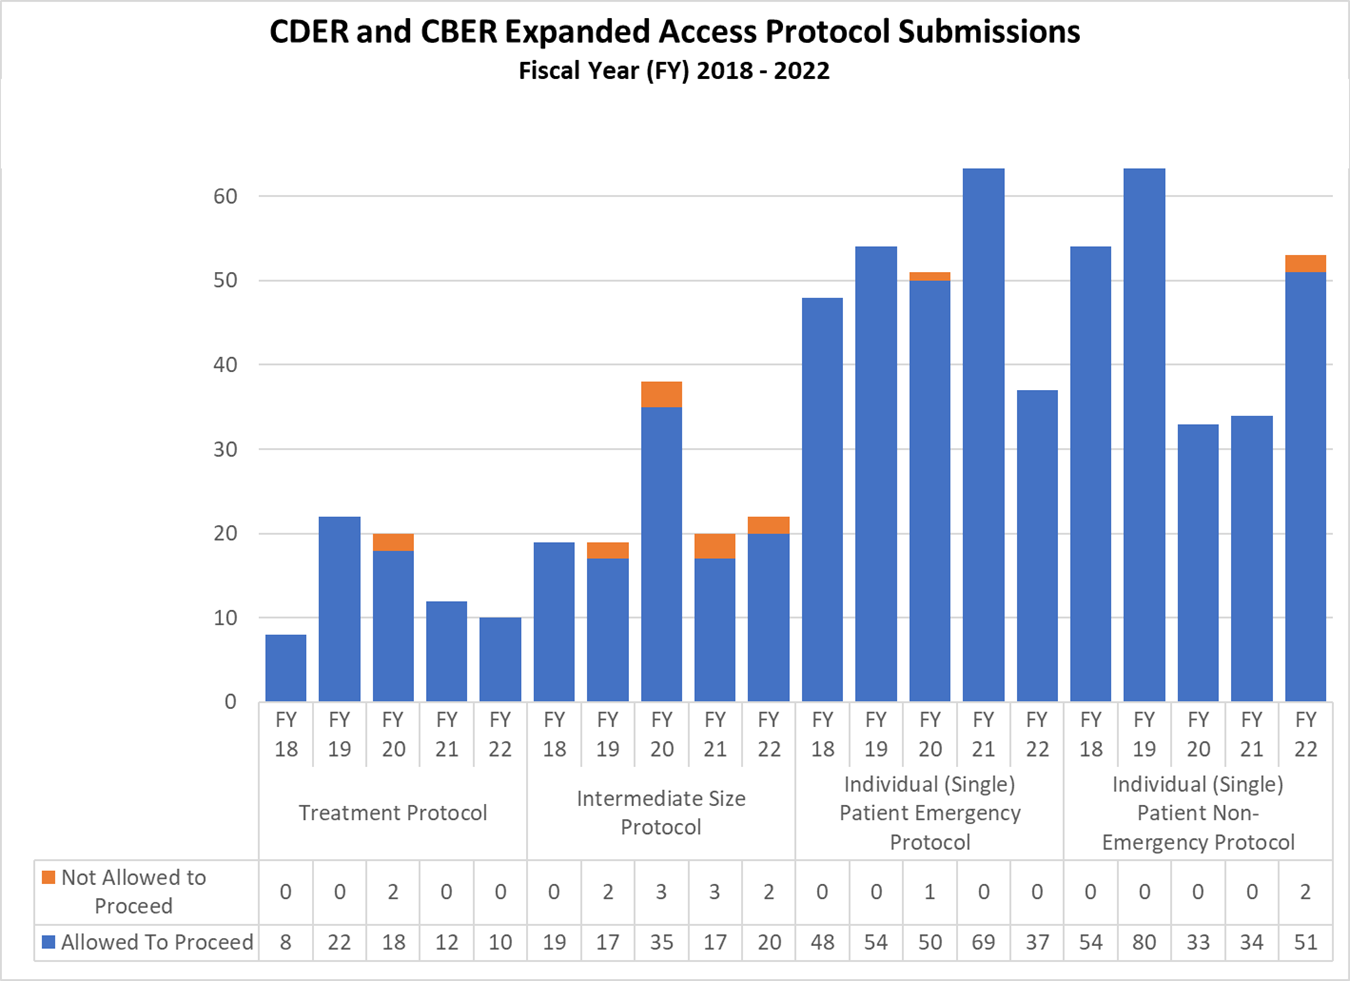 CDER and CBER Expanded Access Protocol Submissions Fiscal Year (FY) 2018 - 2022